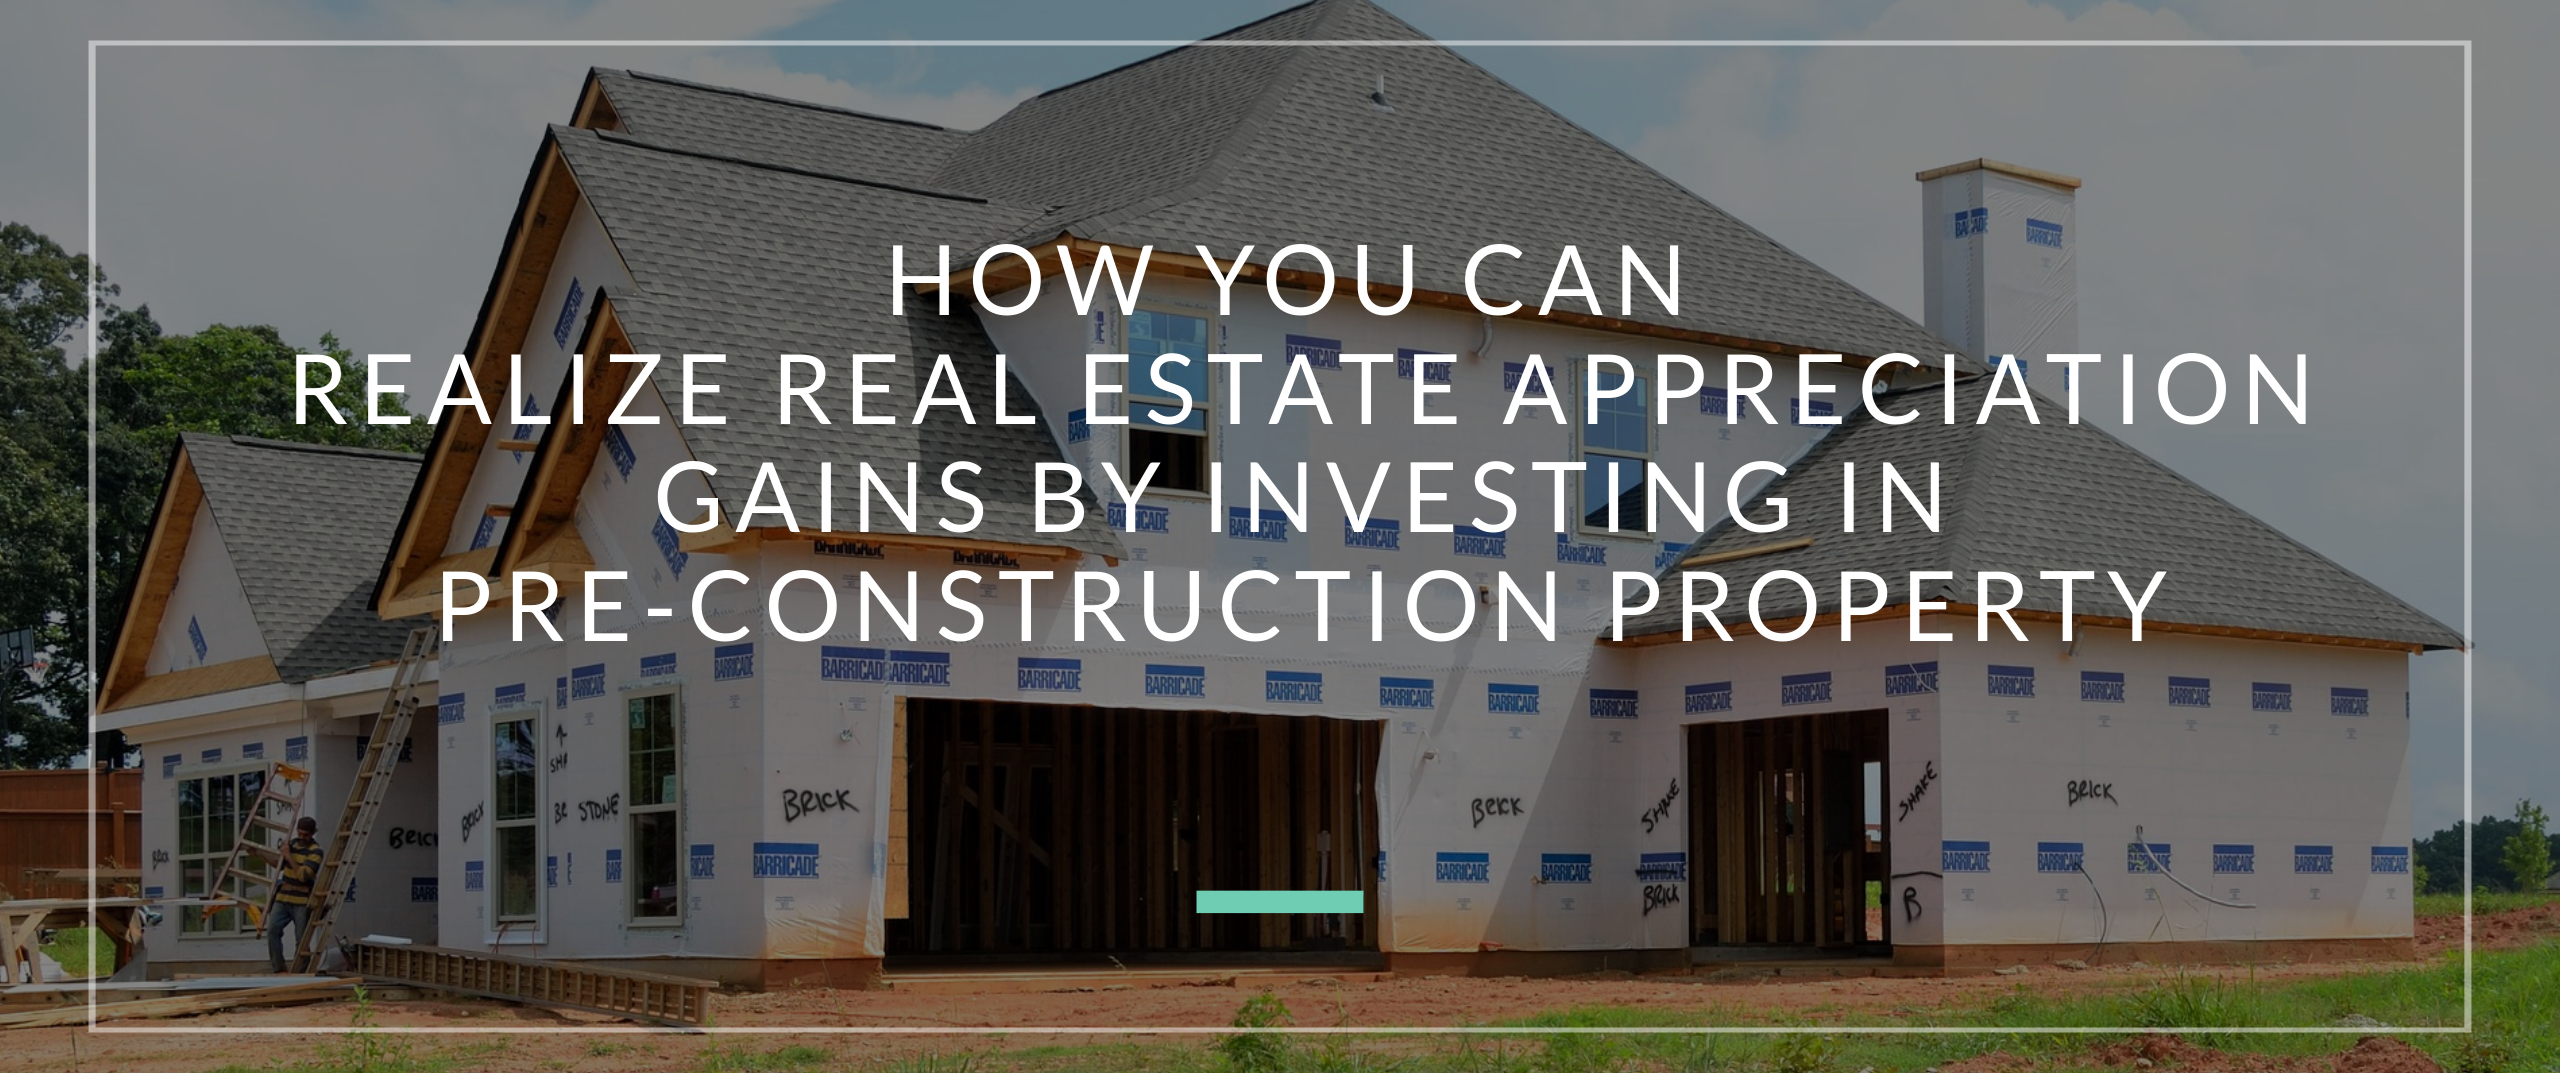 How You Can Realize Real Estate Appreciation Gains By Investing In Pre-Construction Property